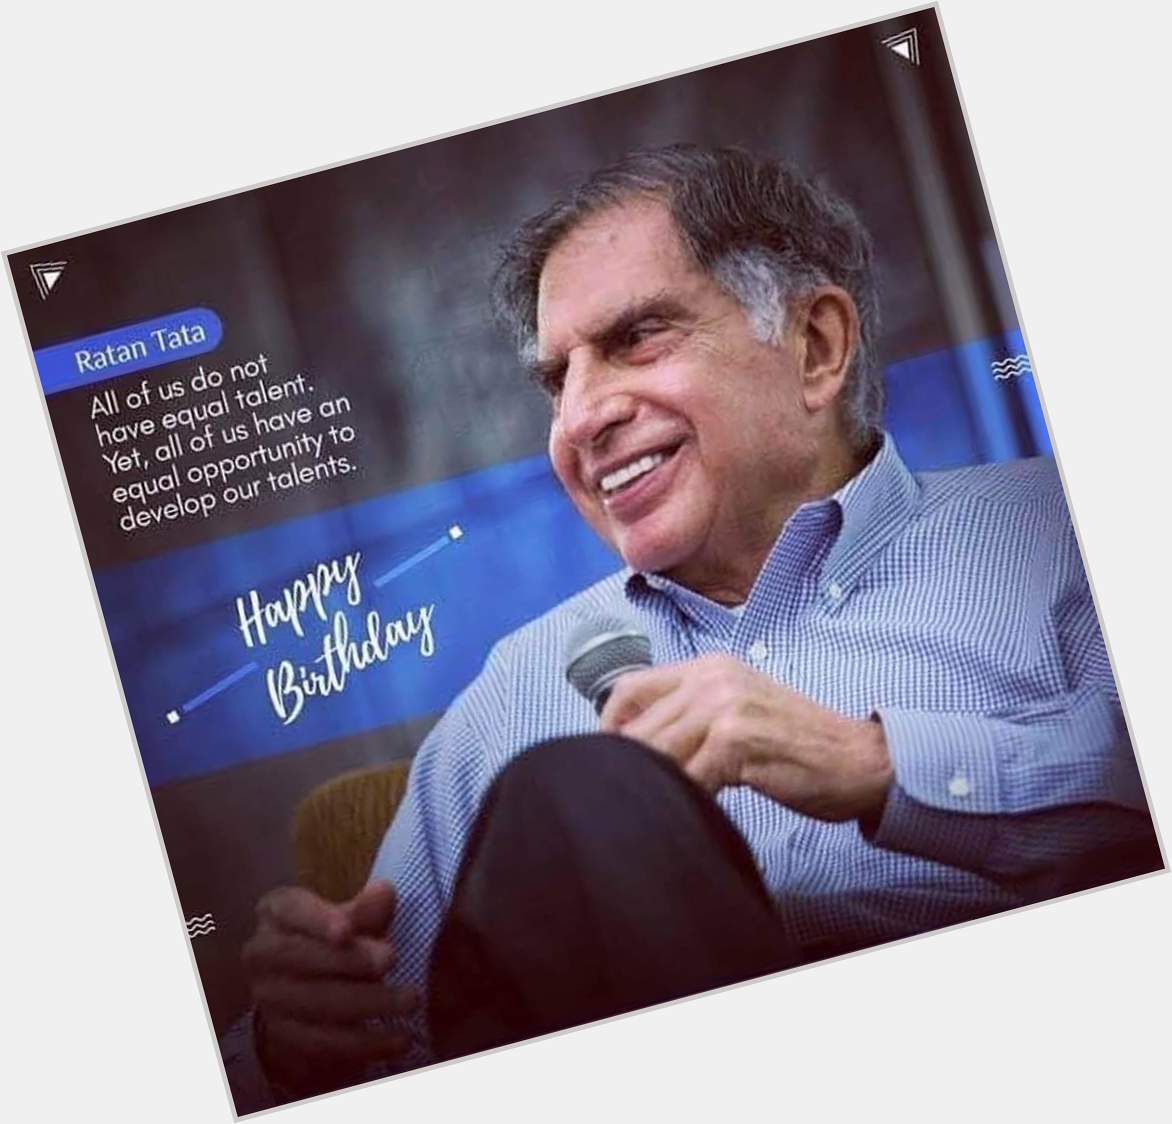 Happy birthday Ratan Tata Sir, wishing you many more happy ones ahead. You are an inspiration for me. 